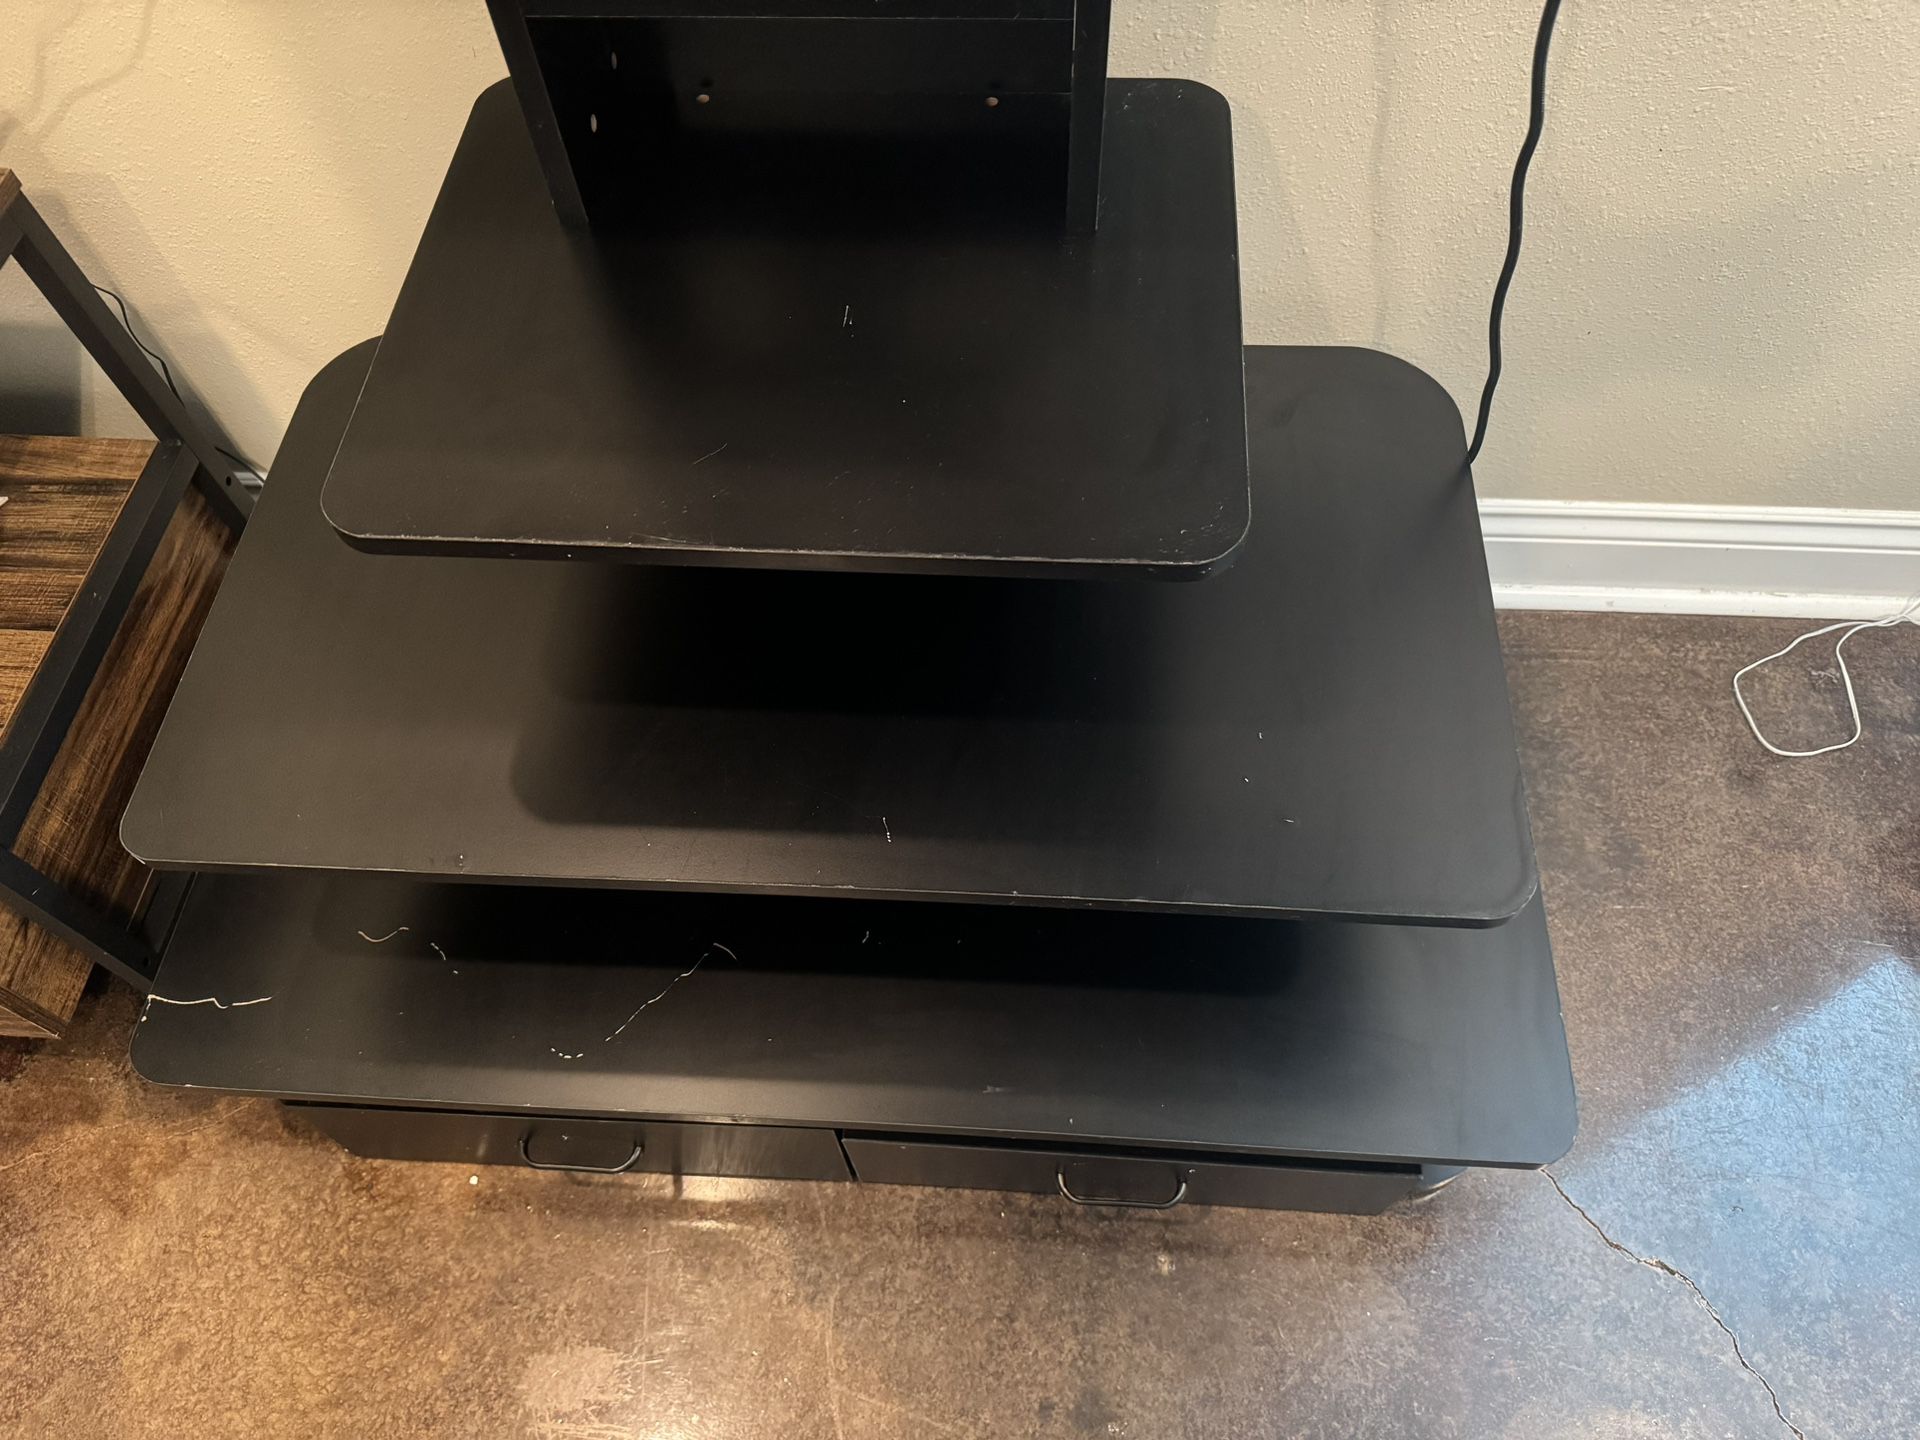 $75-Tv Stand